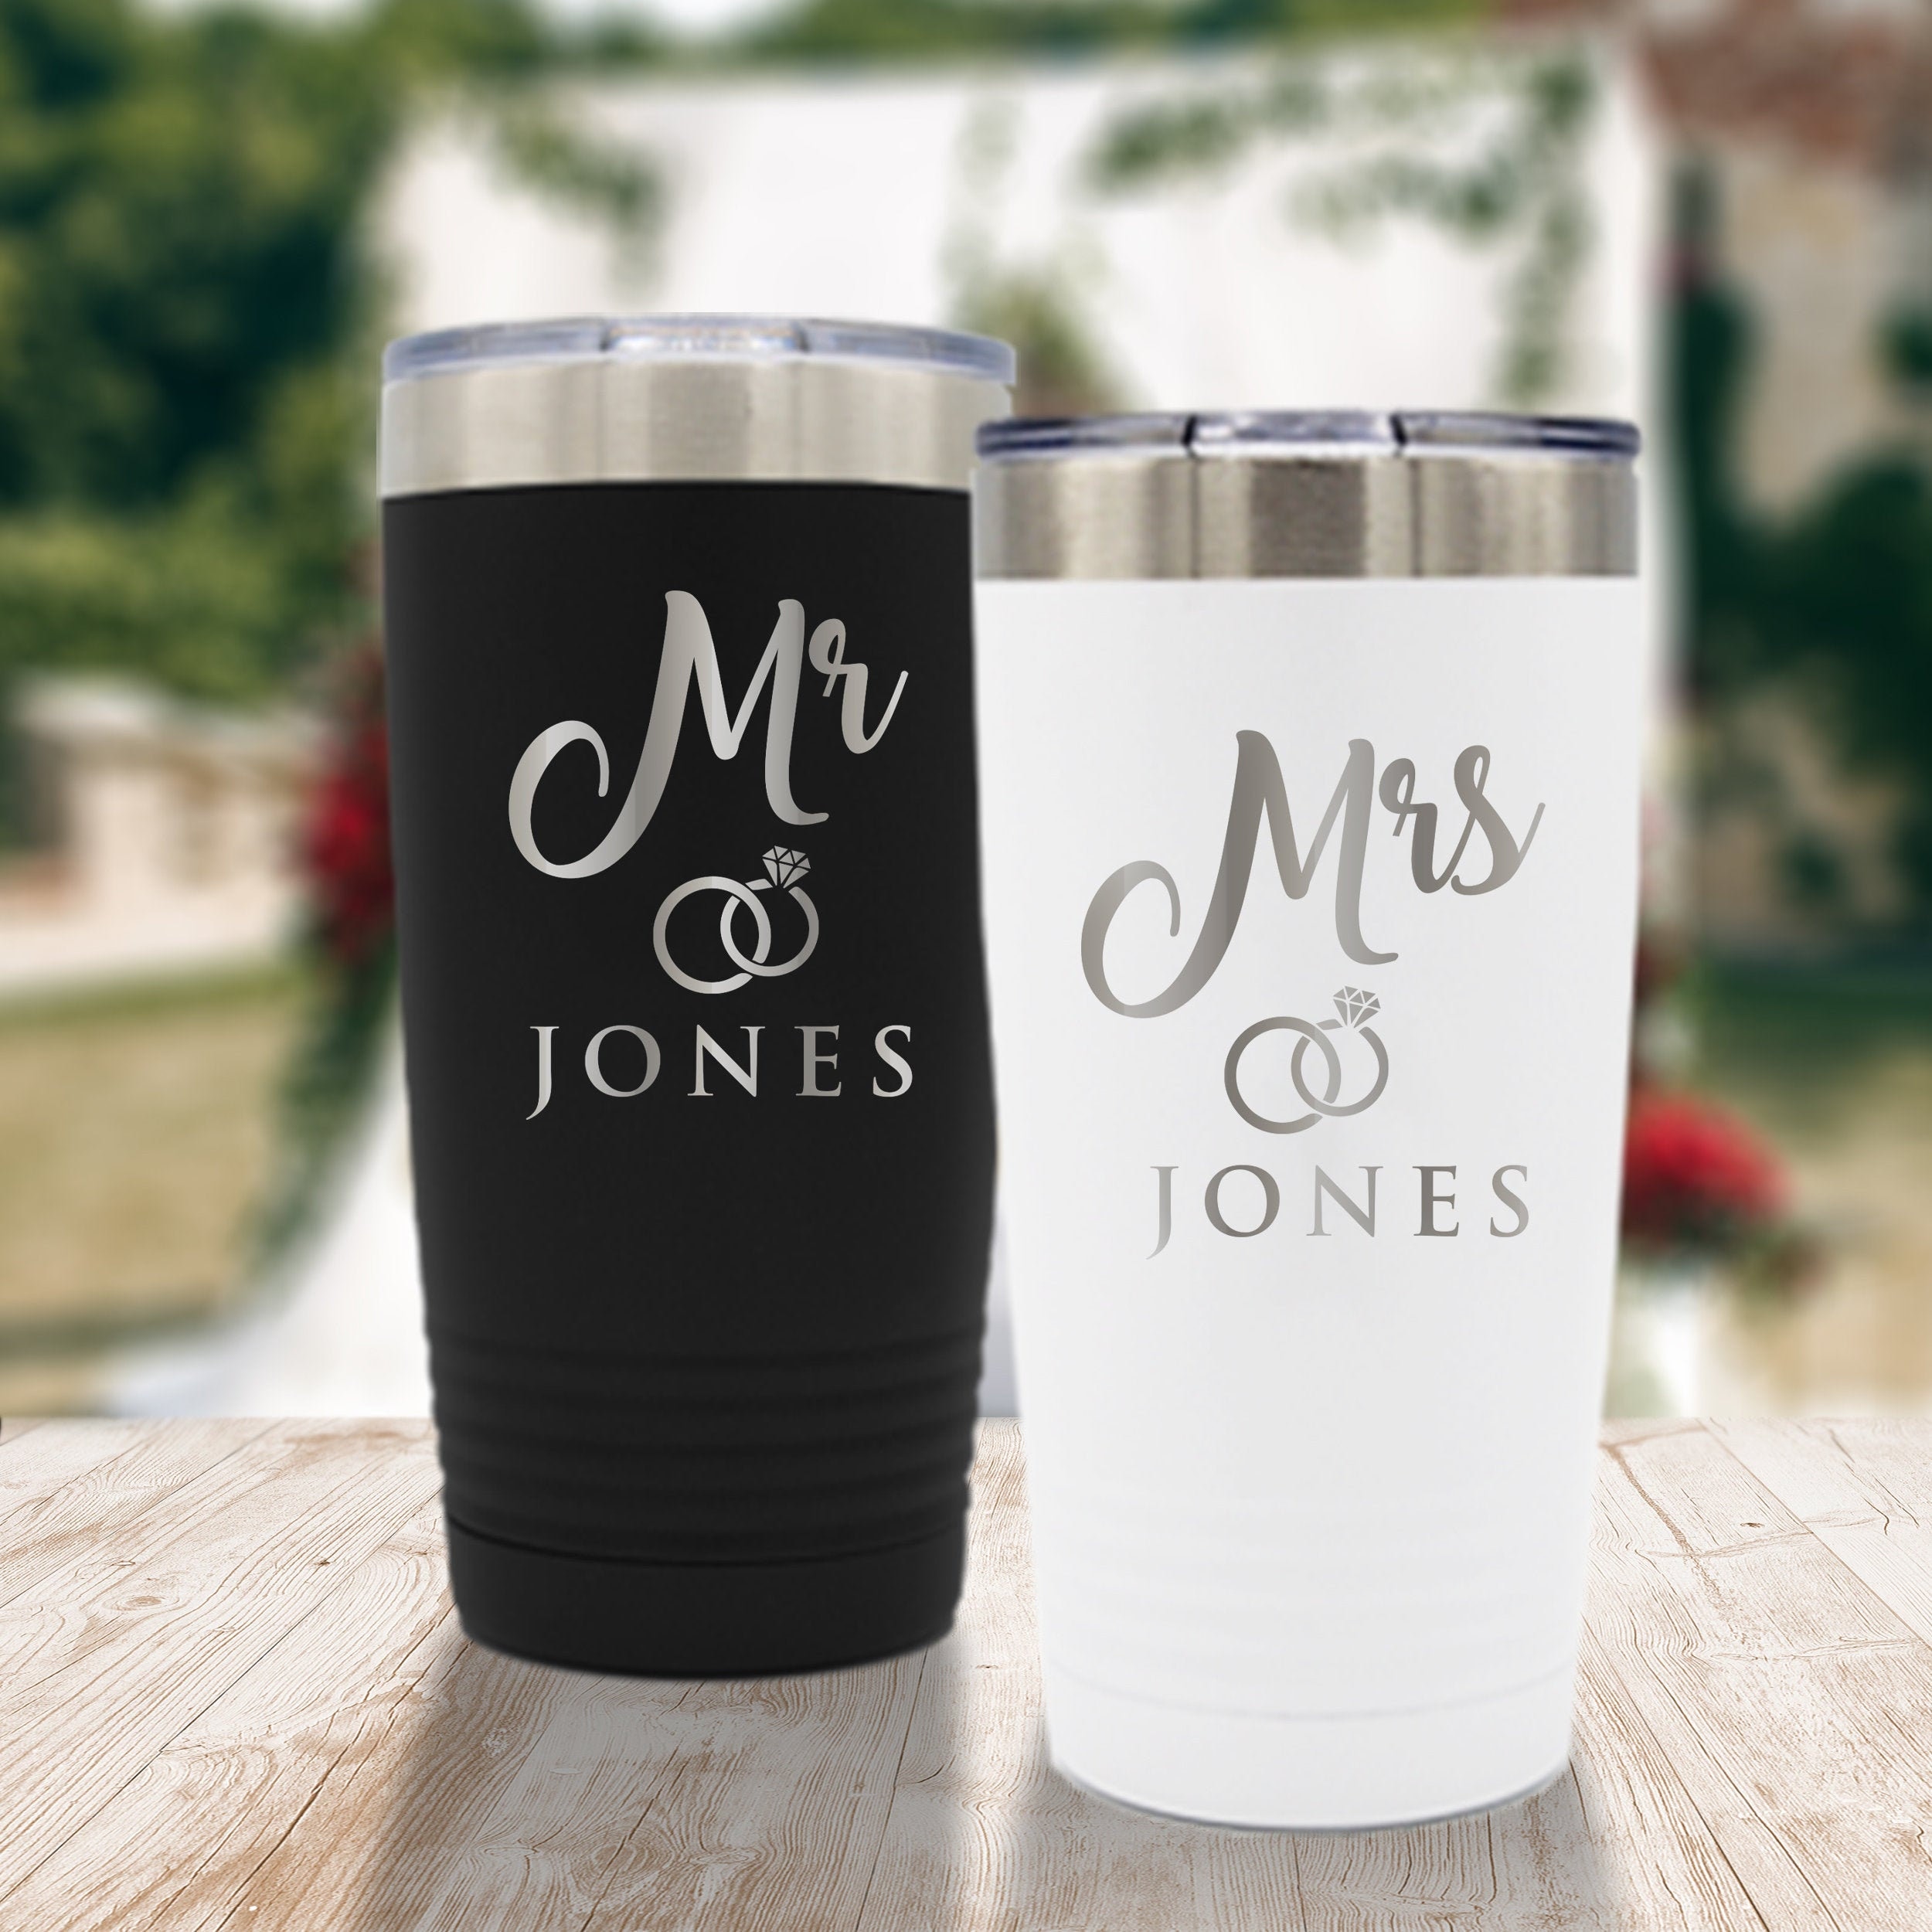 Bride To Be Gift Bride And Groom Tumblers Mr and Mrs Gift Newlywed Gifts Bridal Shower Gifts Bride and Groom Gift Last Name Gift